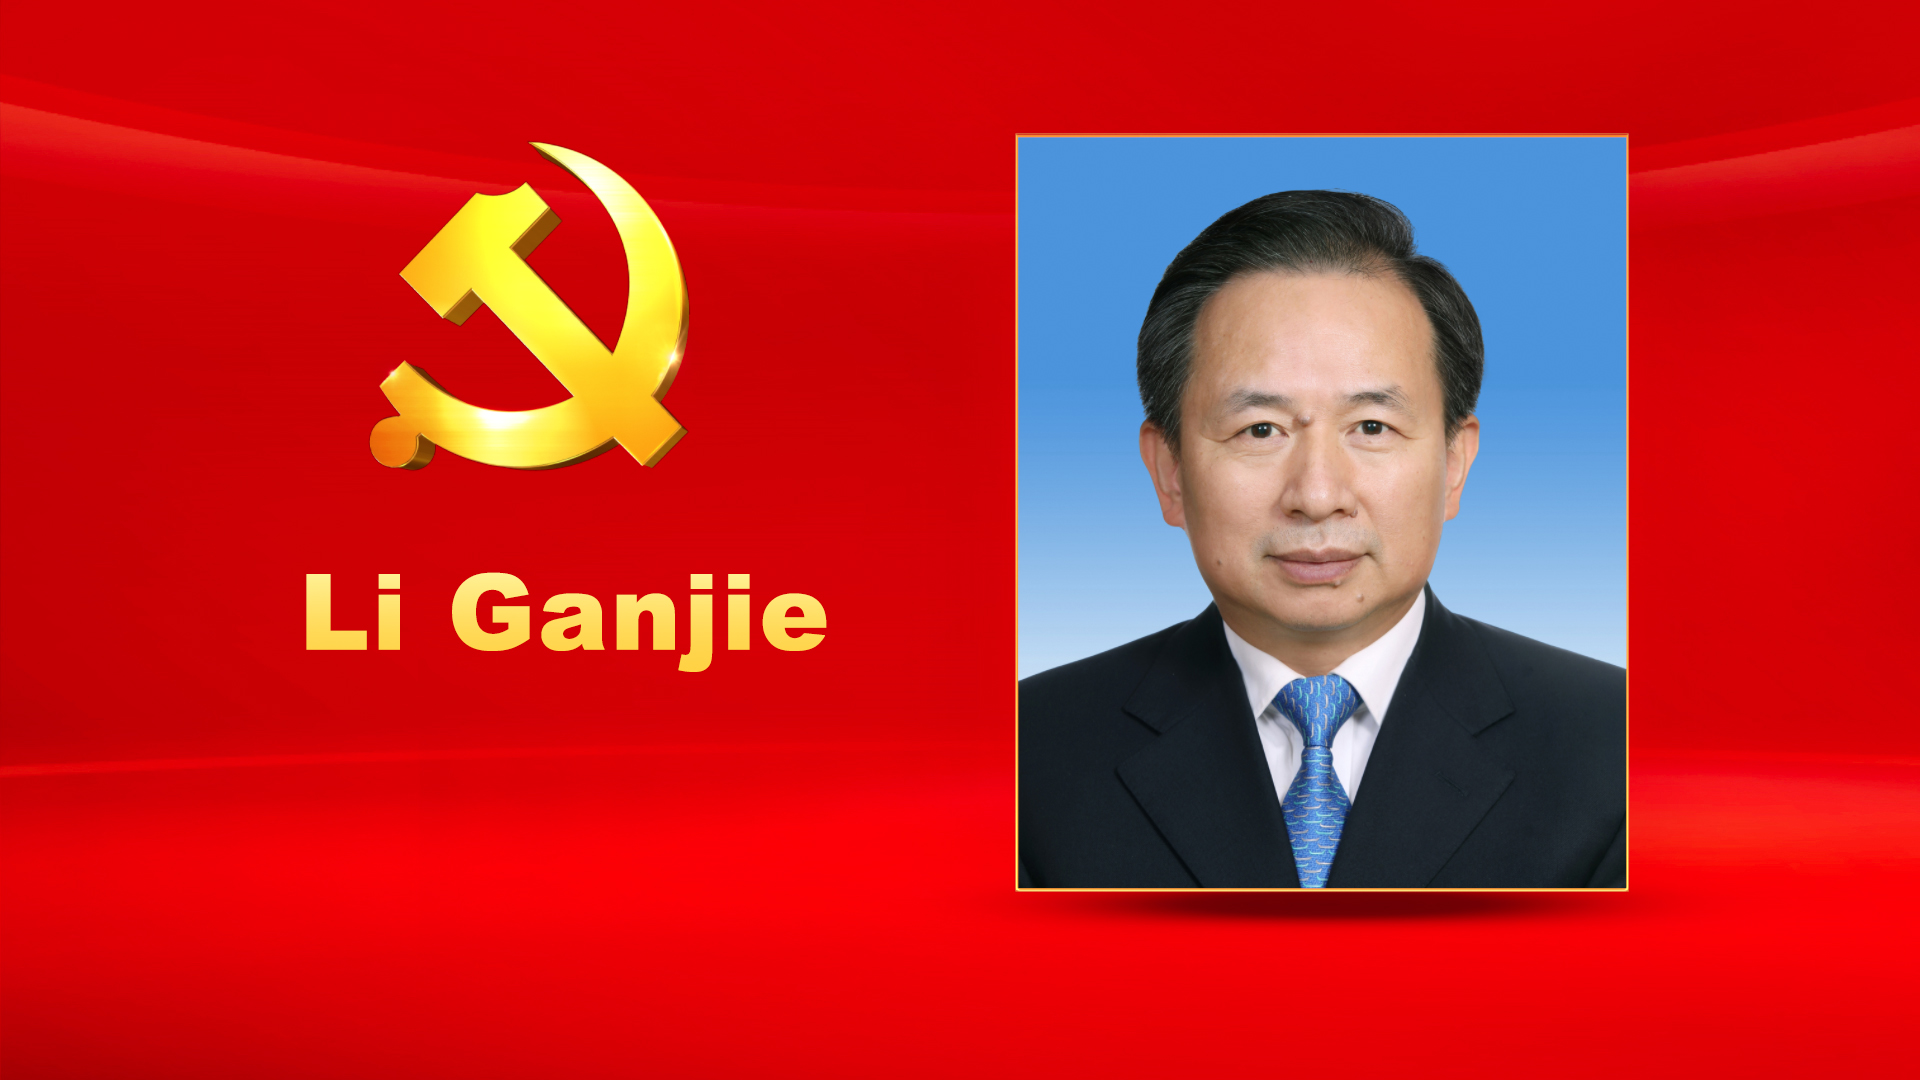 Li Ganjie, male, Han ethnicity, was born in November 1964 and is from Changsha, Hunan Province. He began his first job in July 1989 and joined the Communist Party of China (CPC) in December 1984. Li graduated from Institute of Nuclear Technology, Tsinghua University where he completed a graduate program in nuclear reactor engineering and safety and was awarded a Master of Engineering degree. He holds a professional title of senior engineer. Li is currently a member of the CPC Central Committee Political Bureau, a member of the CPC Central Committee Secretariat, Secretary of the CPC Shandong Provincial Committee, and Chairman of the Standing Committee of the Shandong Provincial People's Congress.